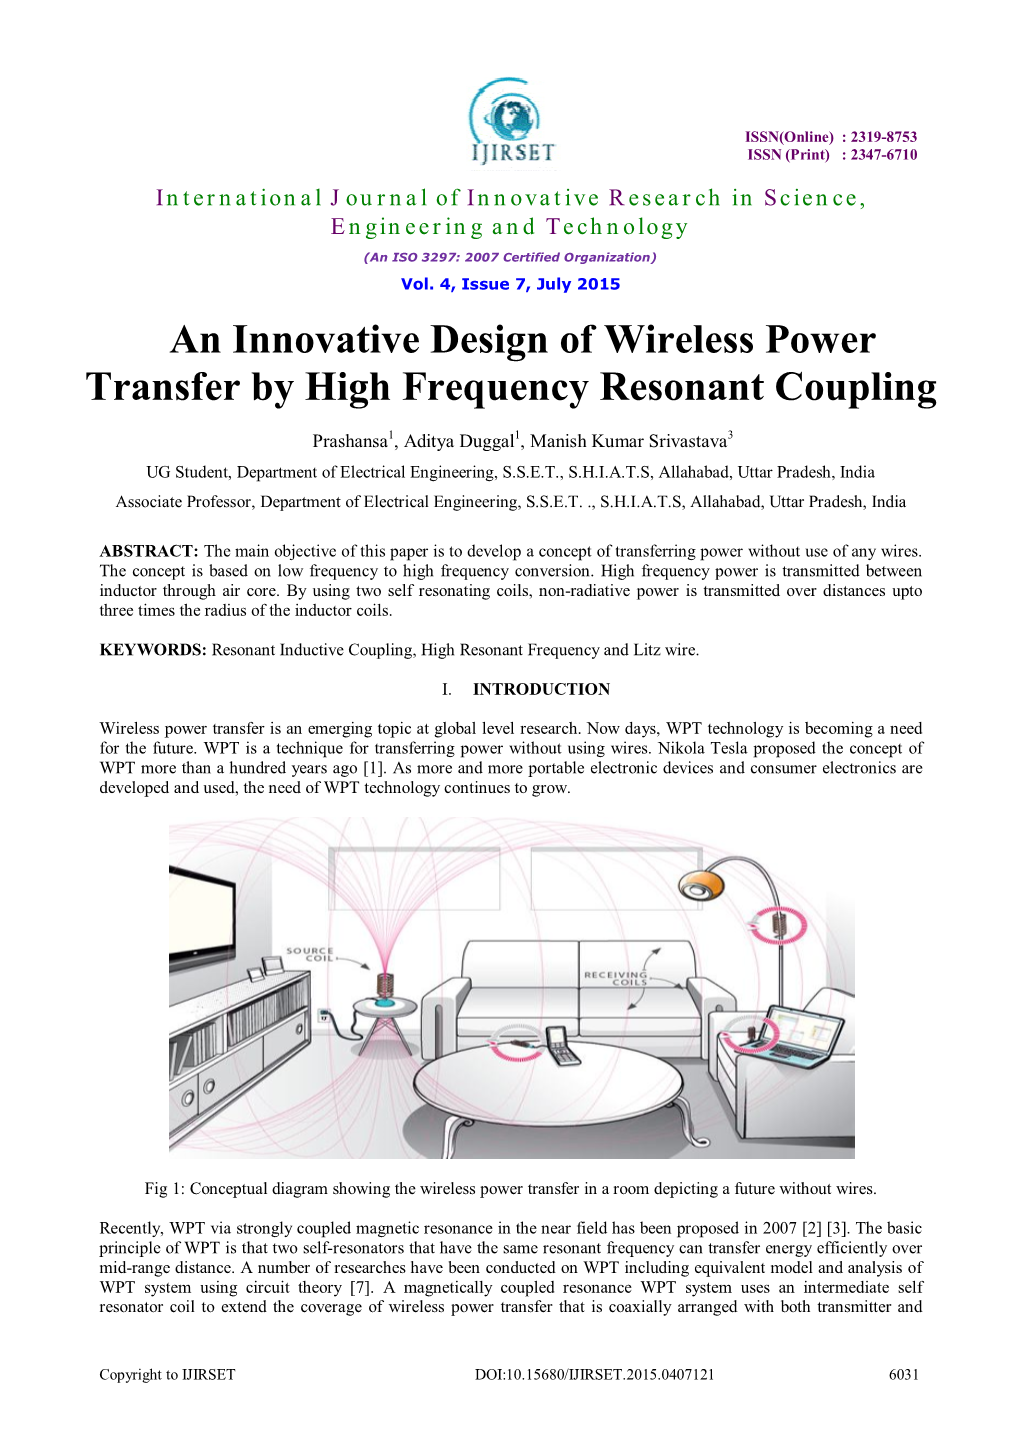 An Innovative Design of Wireless Power Transfer by High Frequency